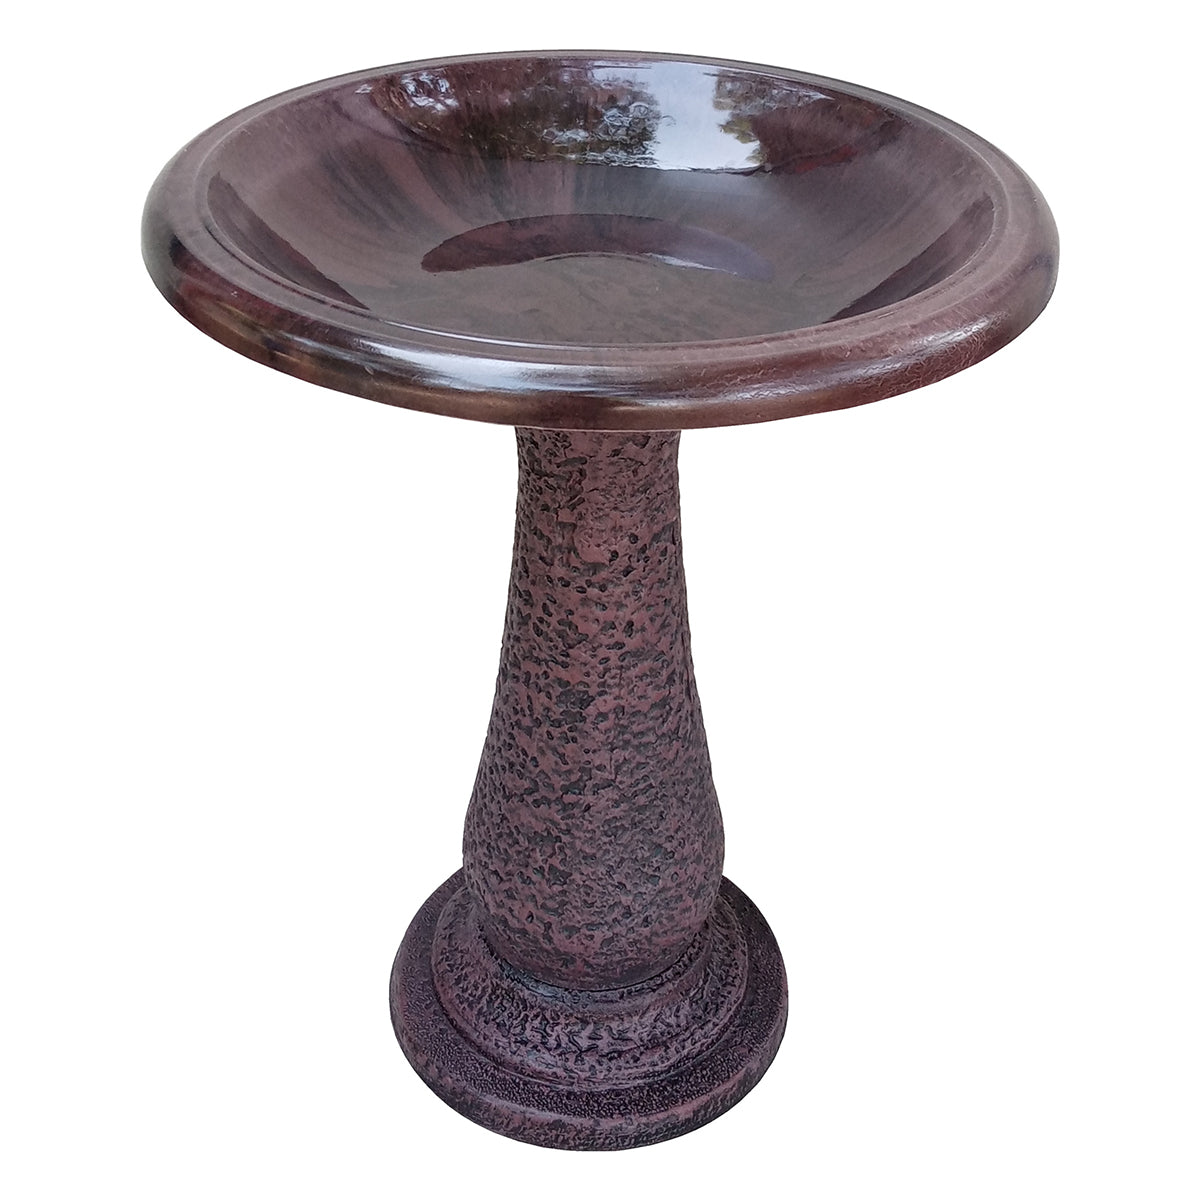 Antique Brown Fiber Clay Birdbath. Made of 70% clay, 25% plastic, and 5% fiber. Impact and shatter-resistant. UV protection. 19"D x 24"H 21"H base, 8 lbs.